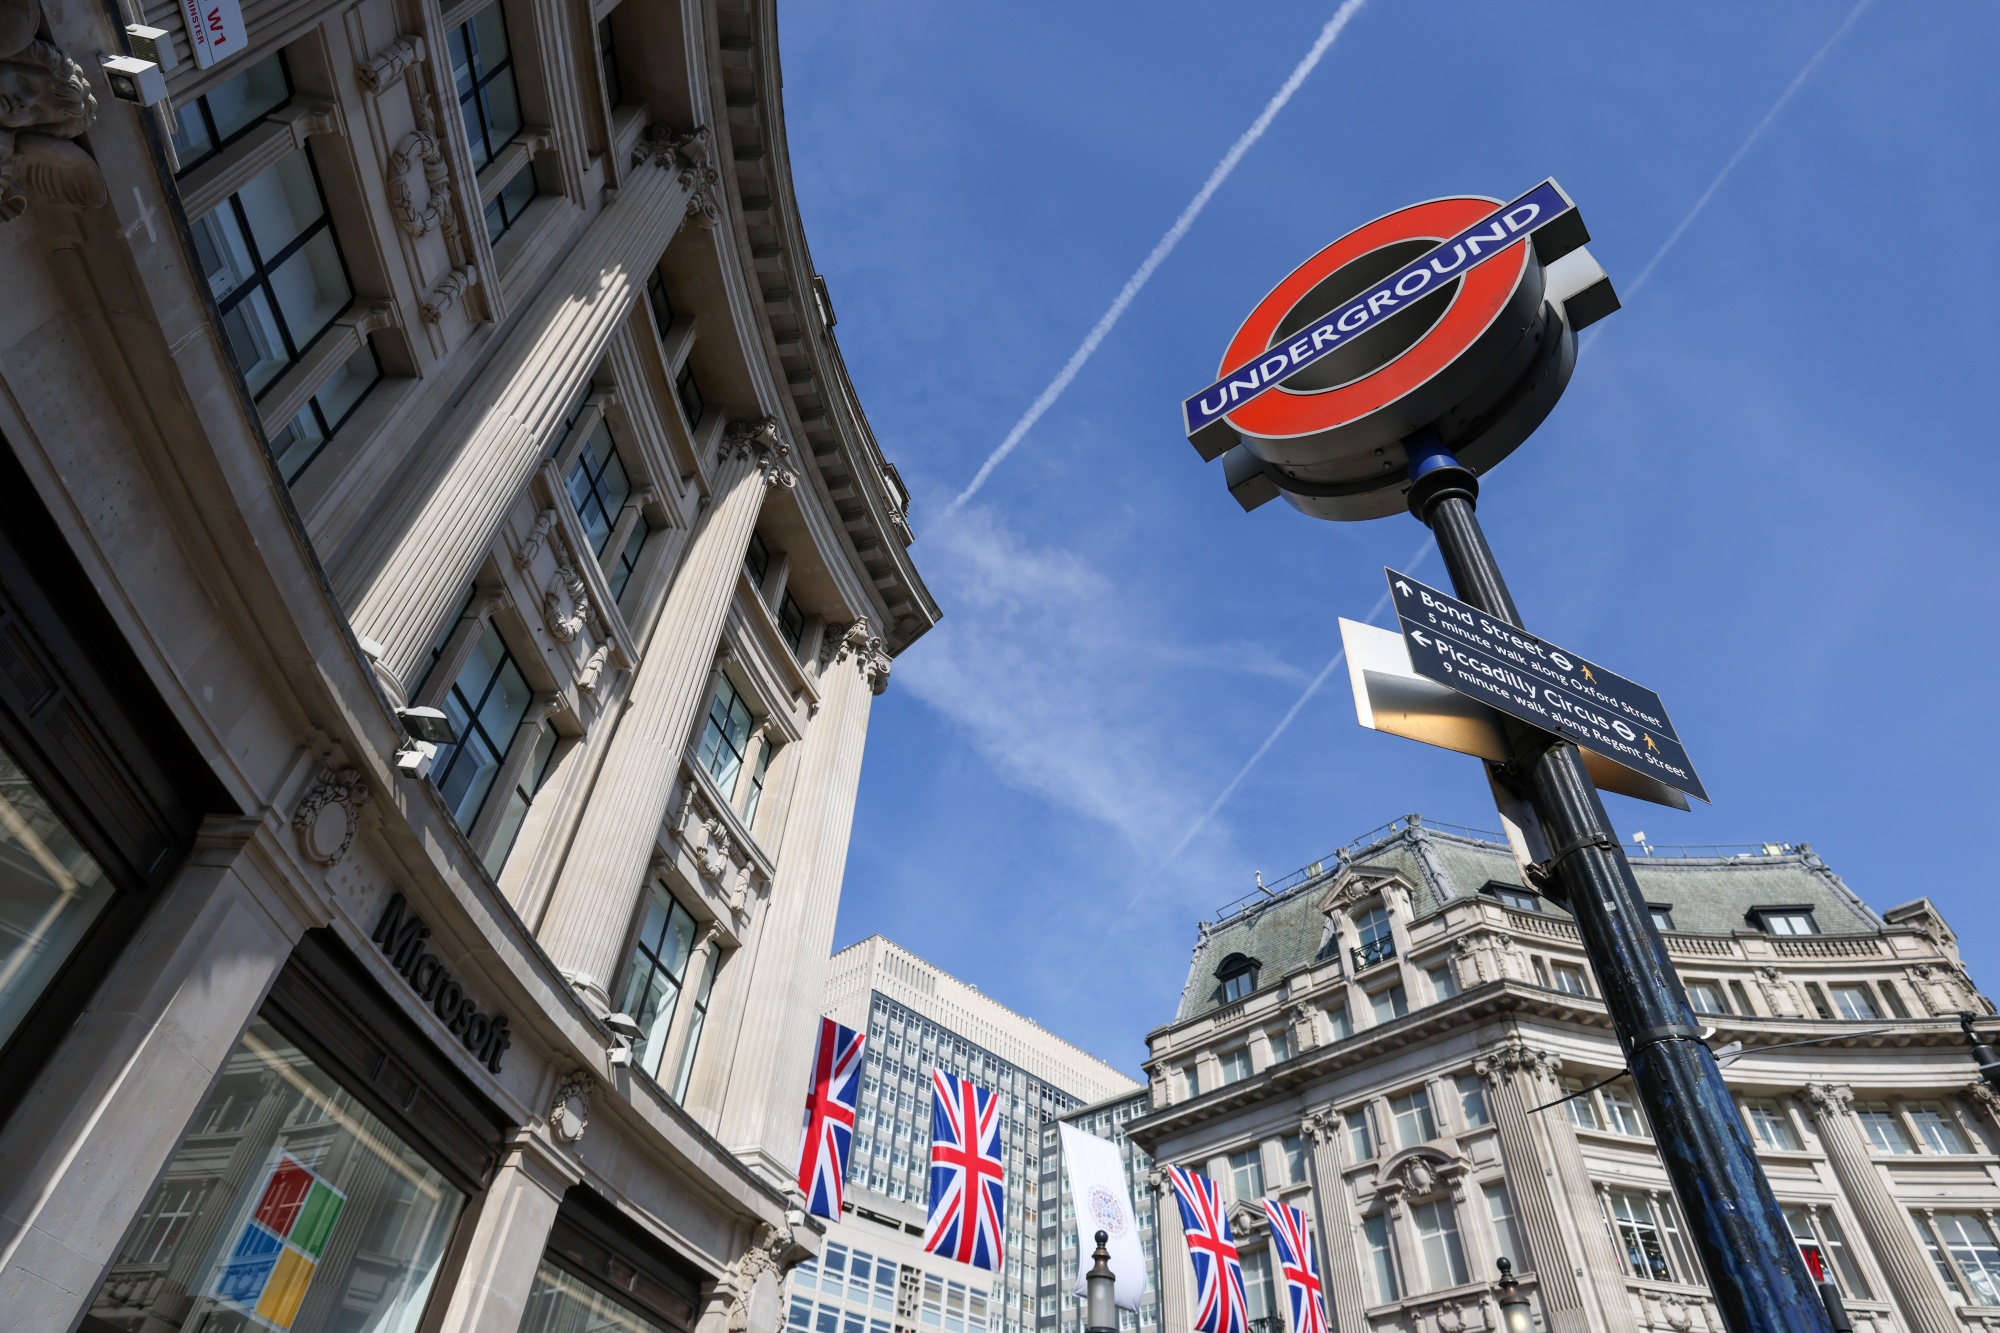 London's Oxford Circus Is Kicking Out Cars - Bloomberg